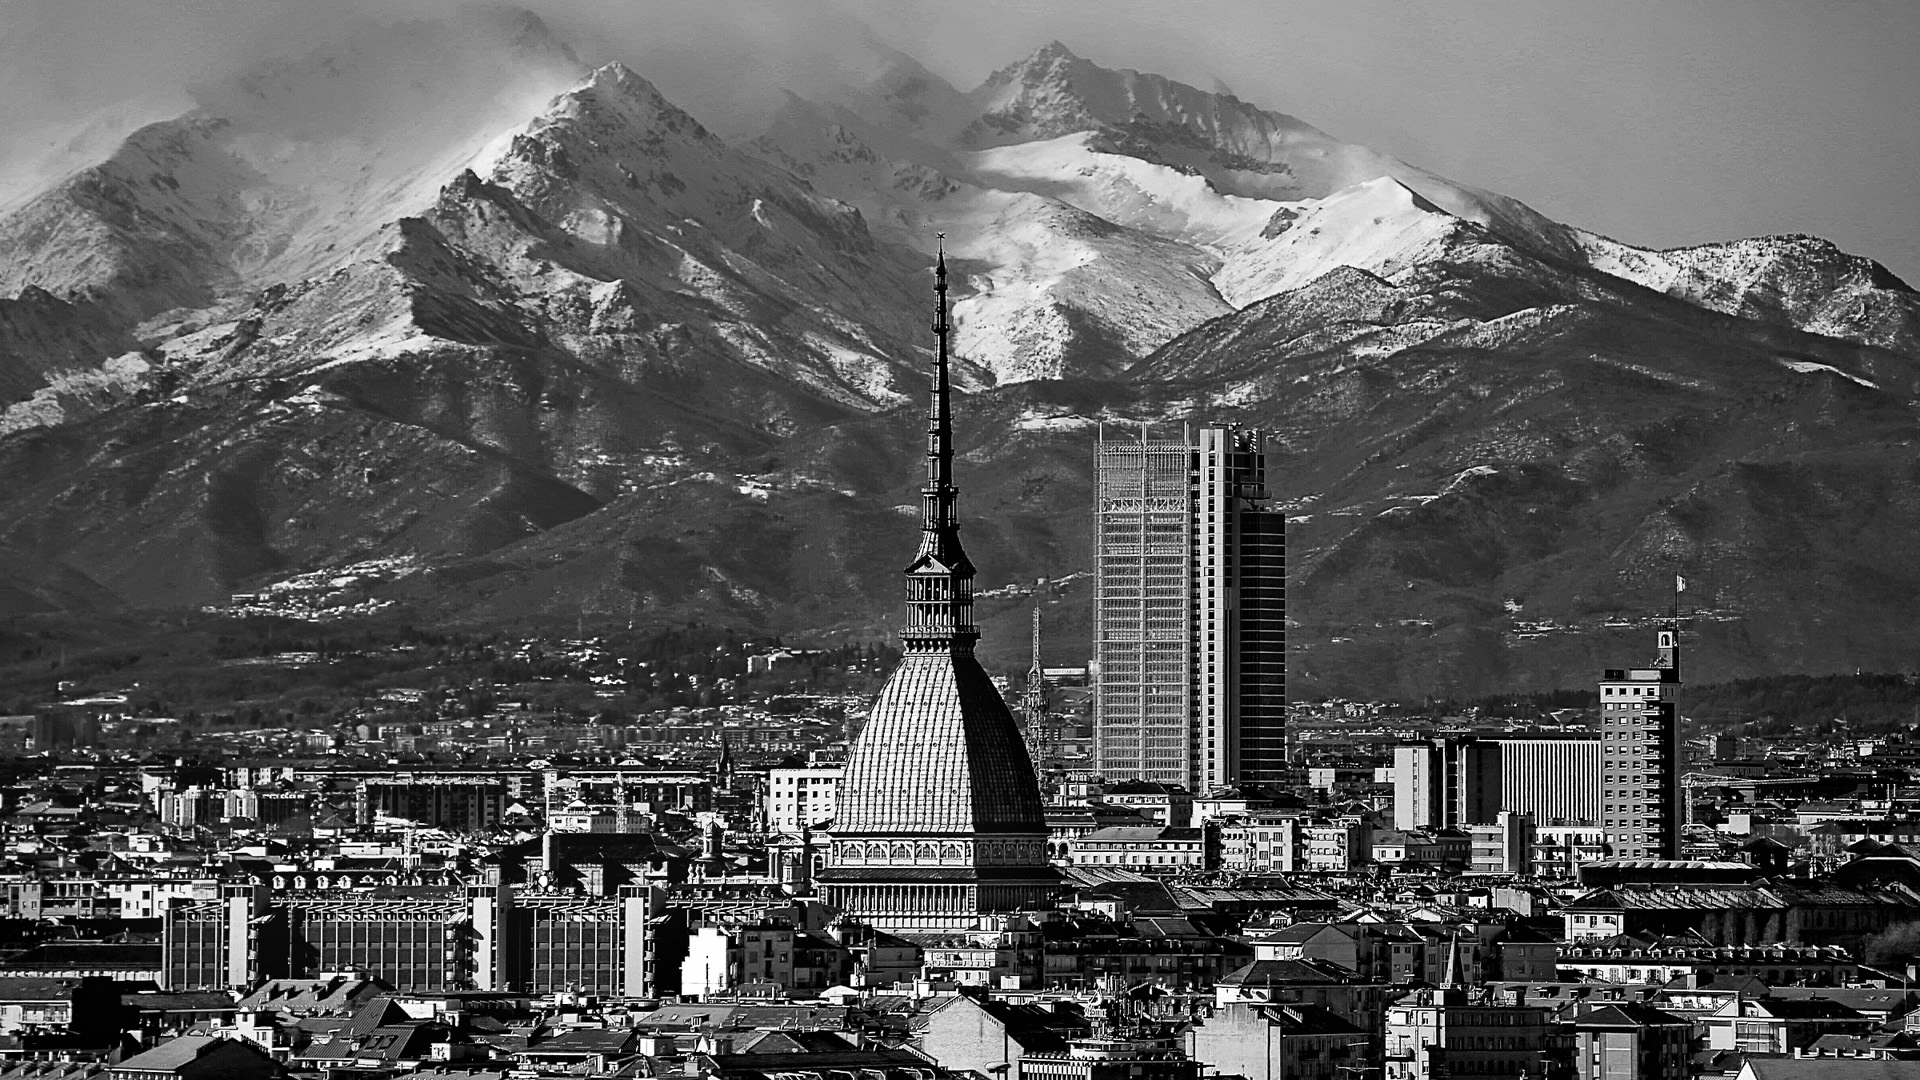 TORINO IS A CITY THAT CAN SURPRISE THE WORLD